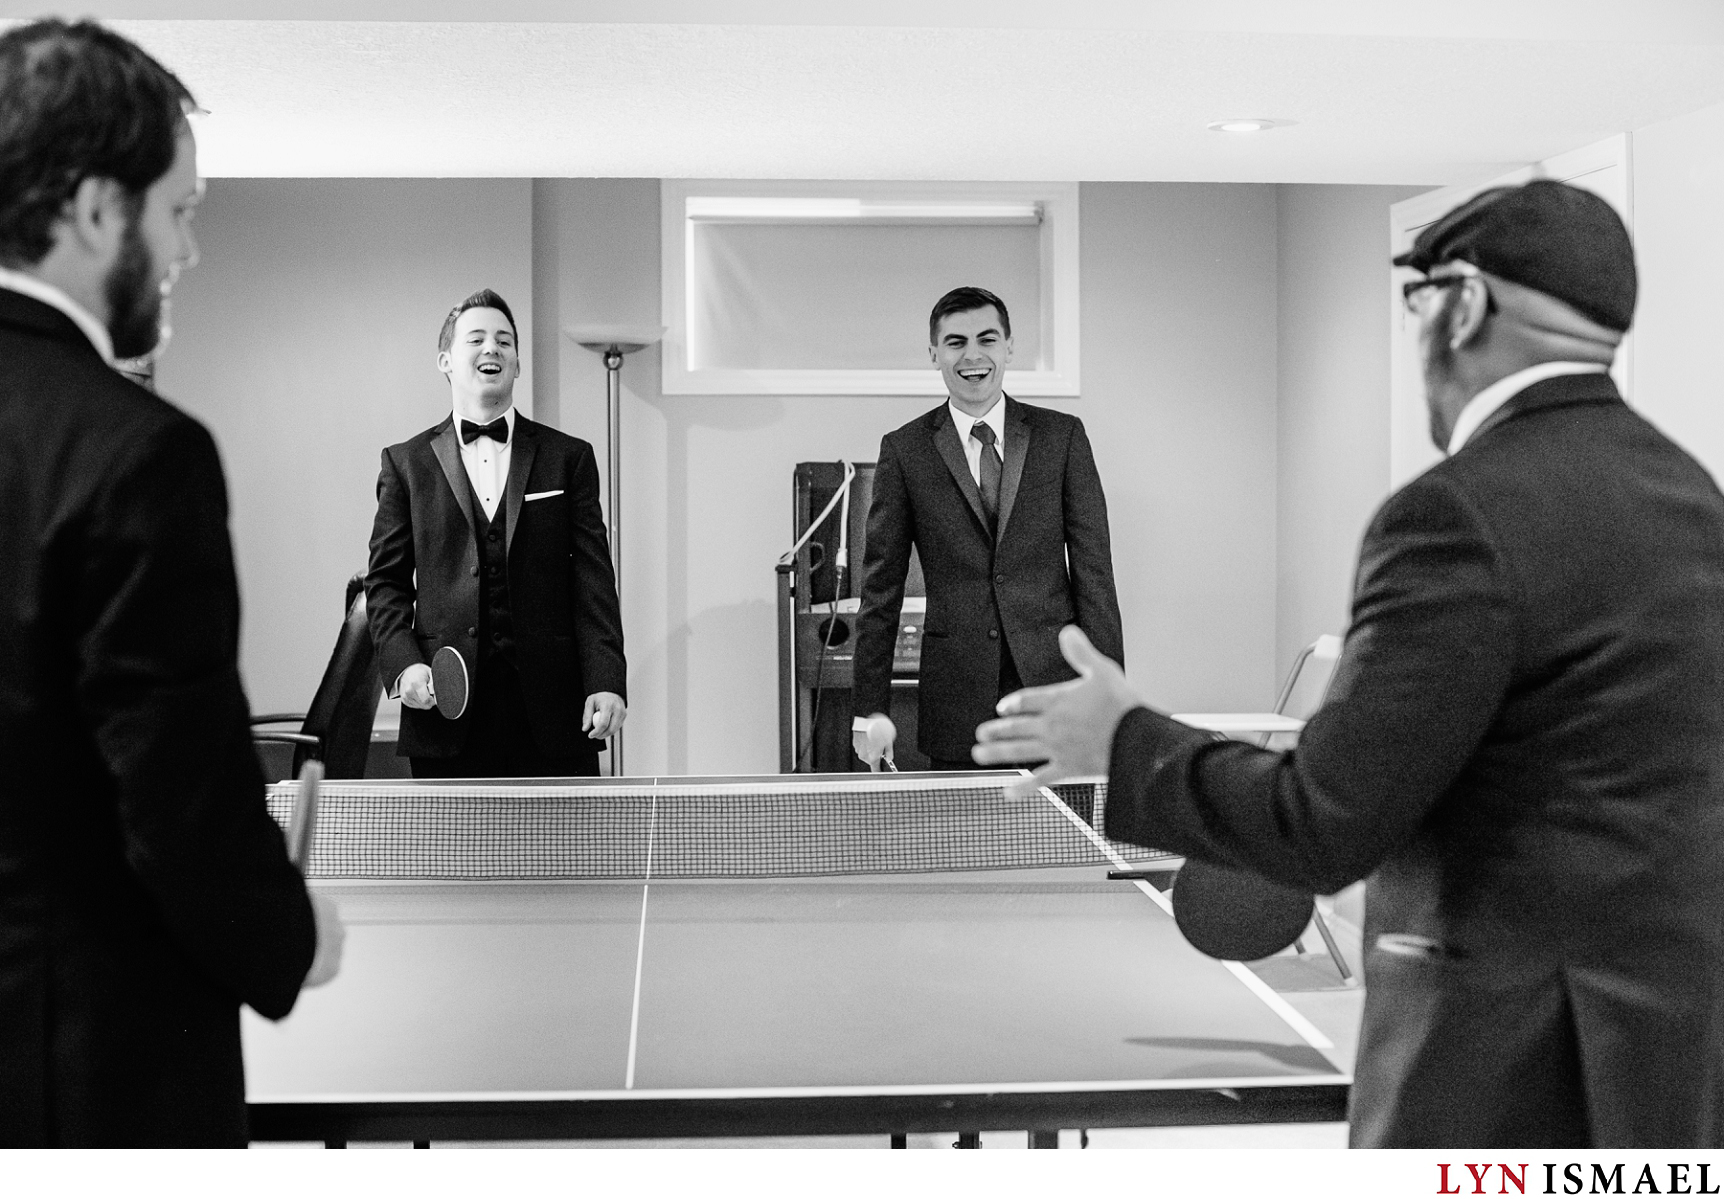 Groom and groomsmen playing ping pong before the wedding ceremony